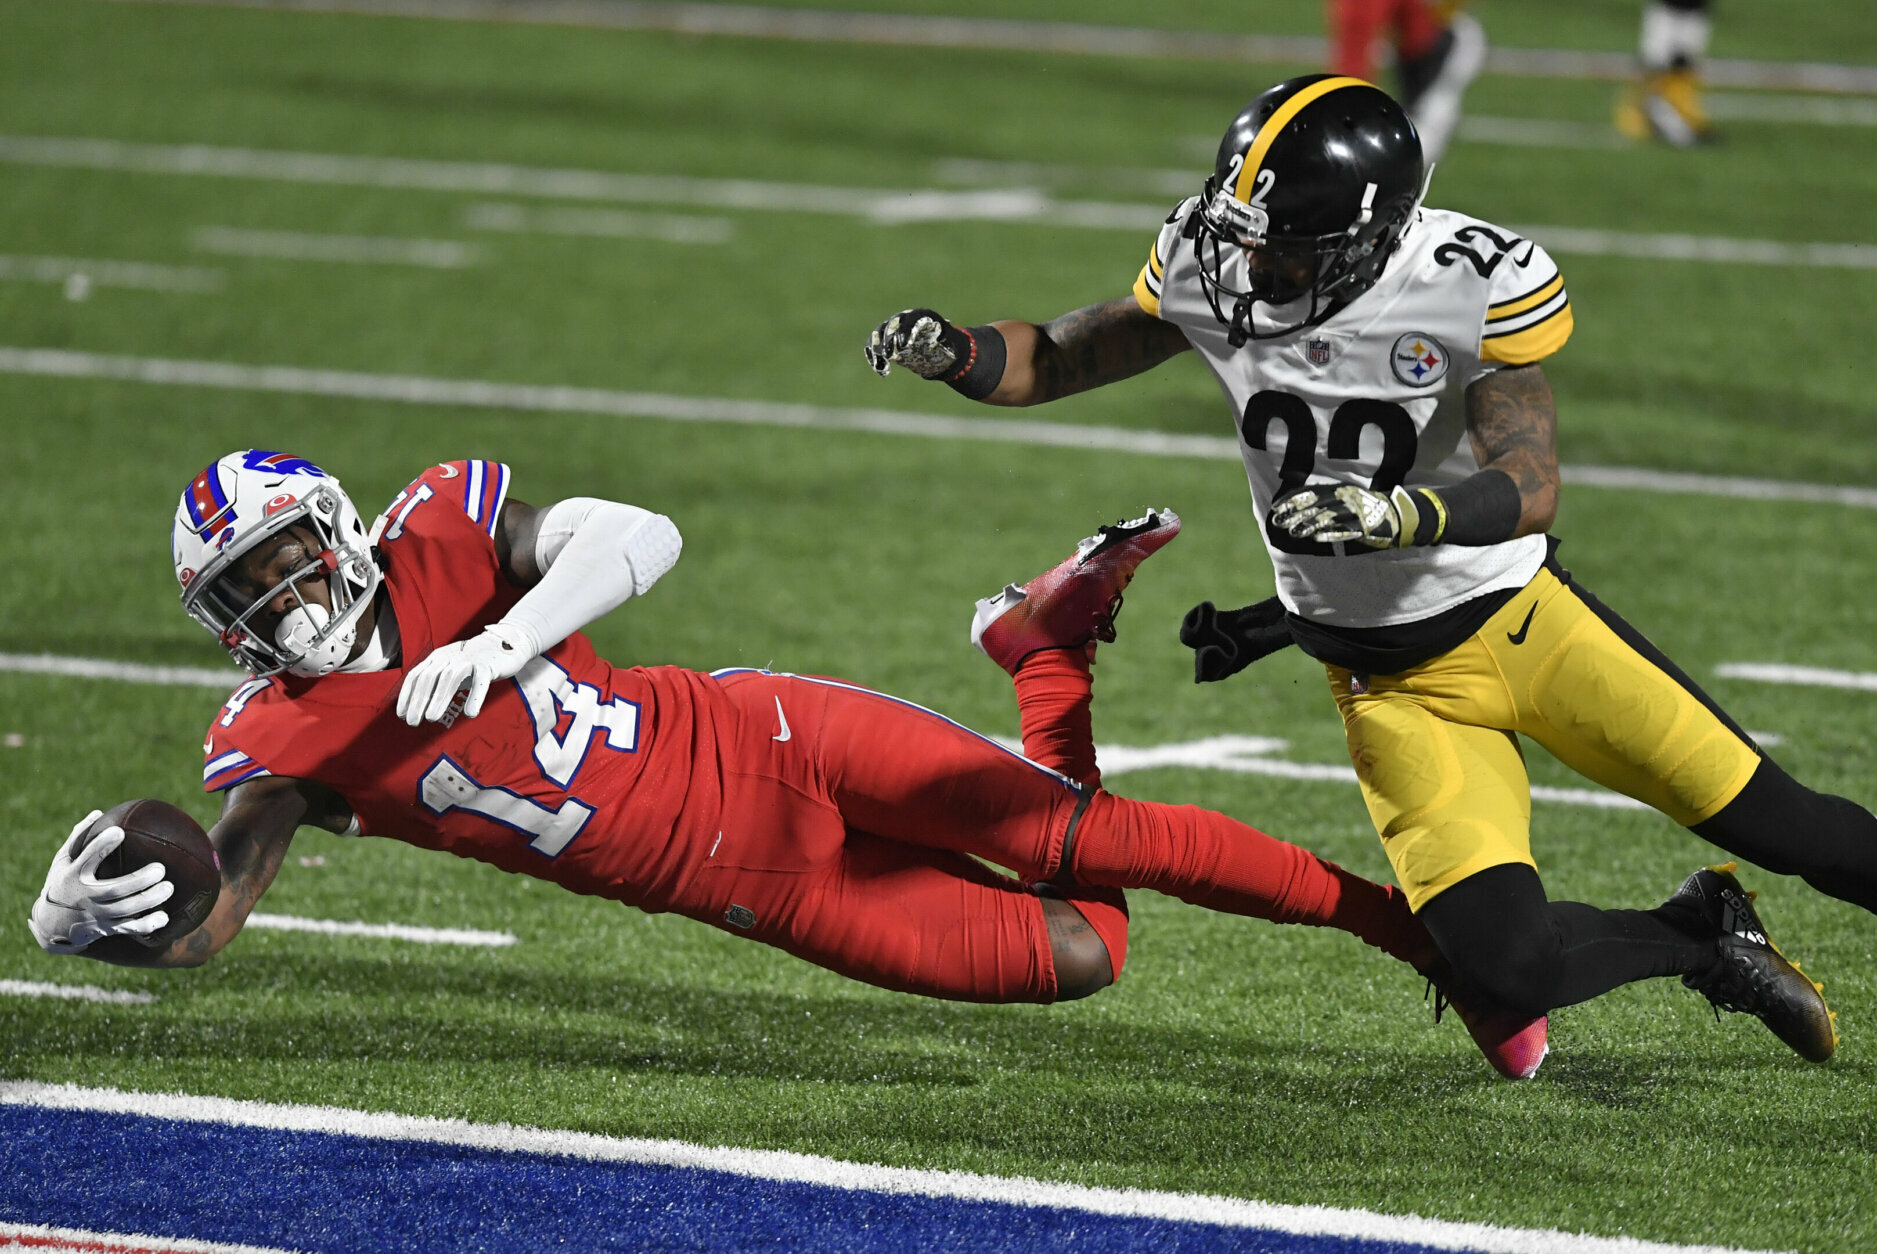 <p><b><i>Steelers 15</i></b><br />
<b><i>Bills 26</i></b></p>
<p>Man, Pittsburgh is plummeting. The Steelers are the fifth team in NFL history to suffer back-to-back losses after an 11-0 start. Quarterback <a href="https://www.cbssports.com/nfl/news/concern-mounting-within-steelers-organization-about-ben-roethlisberger-knee-injury/" target="_blank" rel="noopener">Big Ben is hurting</a> and even if he were healthy, his receivers still have a wicked case of the dropsies. Pittsburgh better pull it together or else face the prospect of spending Week 17 in Cleveland having to fight for a division title they should already have just about wrapped up.</p>
<p>But give it up for first place Buffalo. Former Maryland Terp Stefon Diggs is the first player to tally 100 catches this season and has already set a career high with over 1,100 receiving yards, providing a reliable target for <a href="https://profootballtalk.nbcsports.com/2020/12/09/josh-allen-passes-russell-wilson-in-mvp-odds/" target="_blank" rel="noopener">low-key MVP candidate Josh Allen</a>. Diggs and the Bills, not the Steelers, are the biggest threat to Kansas City&#8217;s crown. Speaking of DMV high school stars &#8230;</p>
